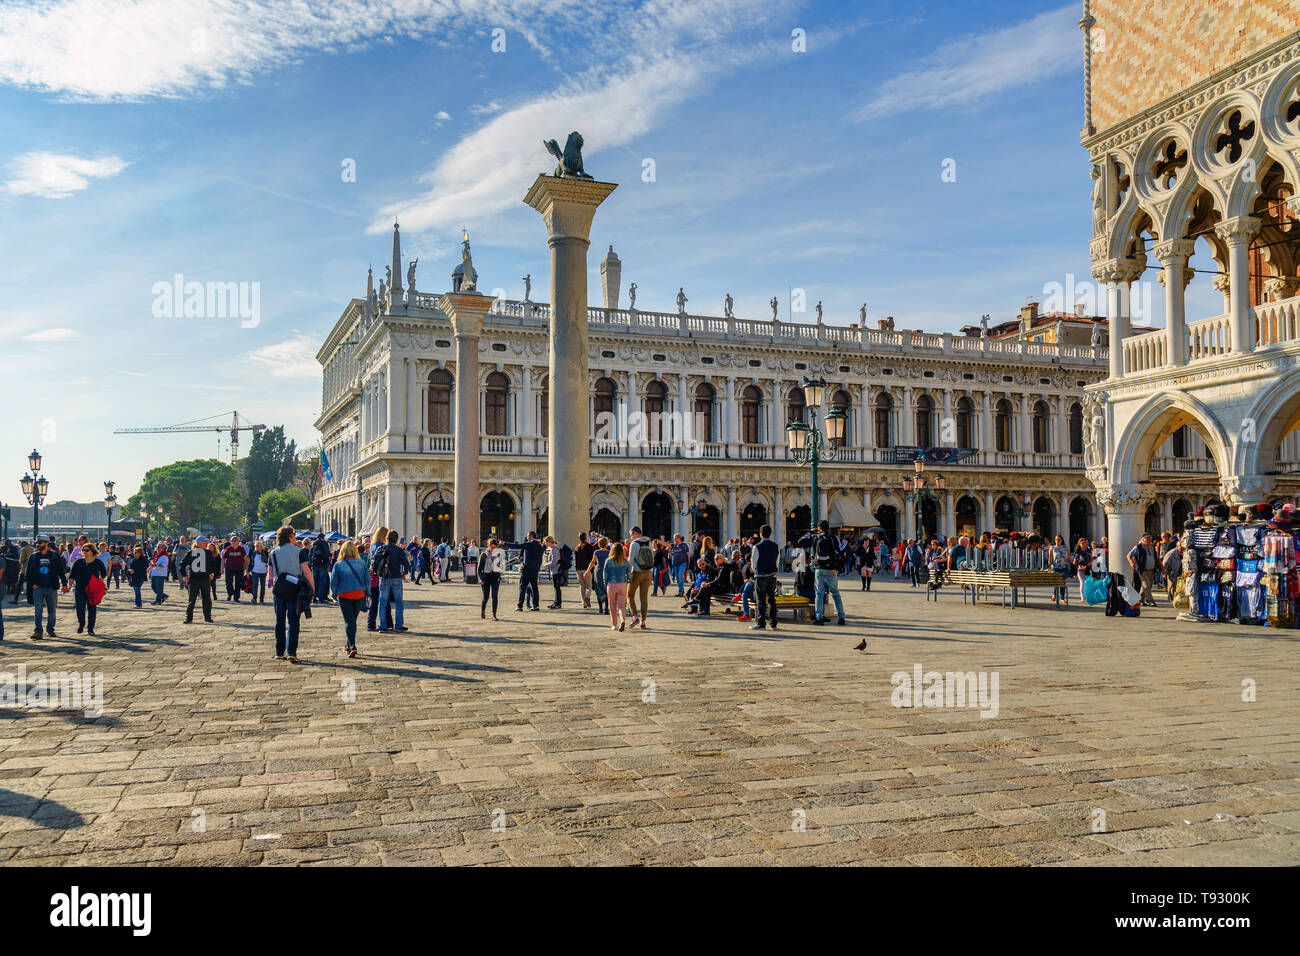 Venice, Italy - October 23, 2018: View of National Library of St Mark's and Saint Mark column on Piazza San Marco Stock Photo